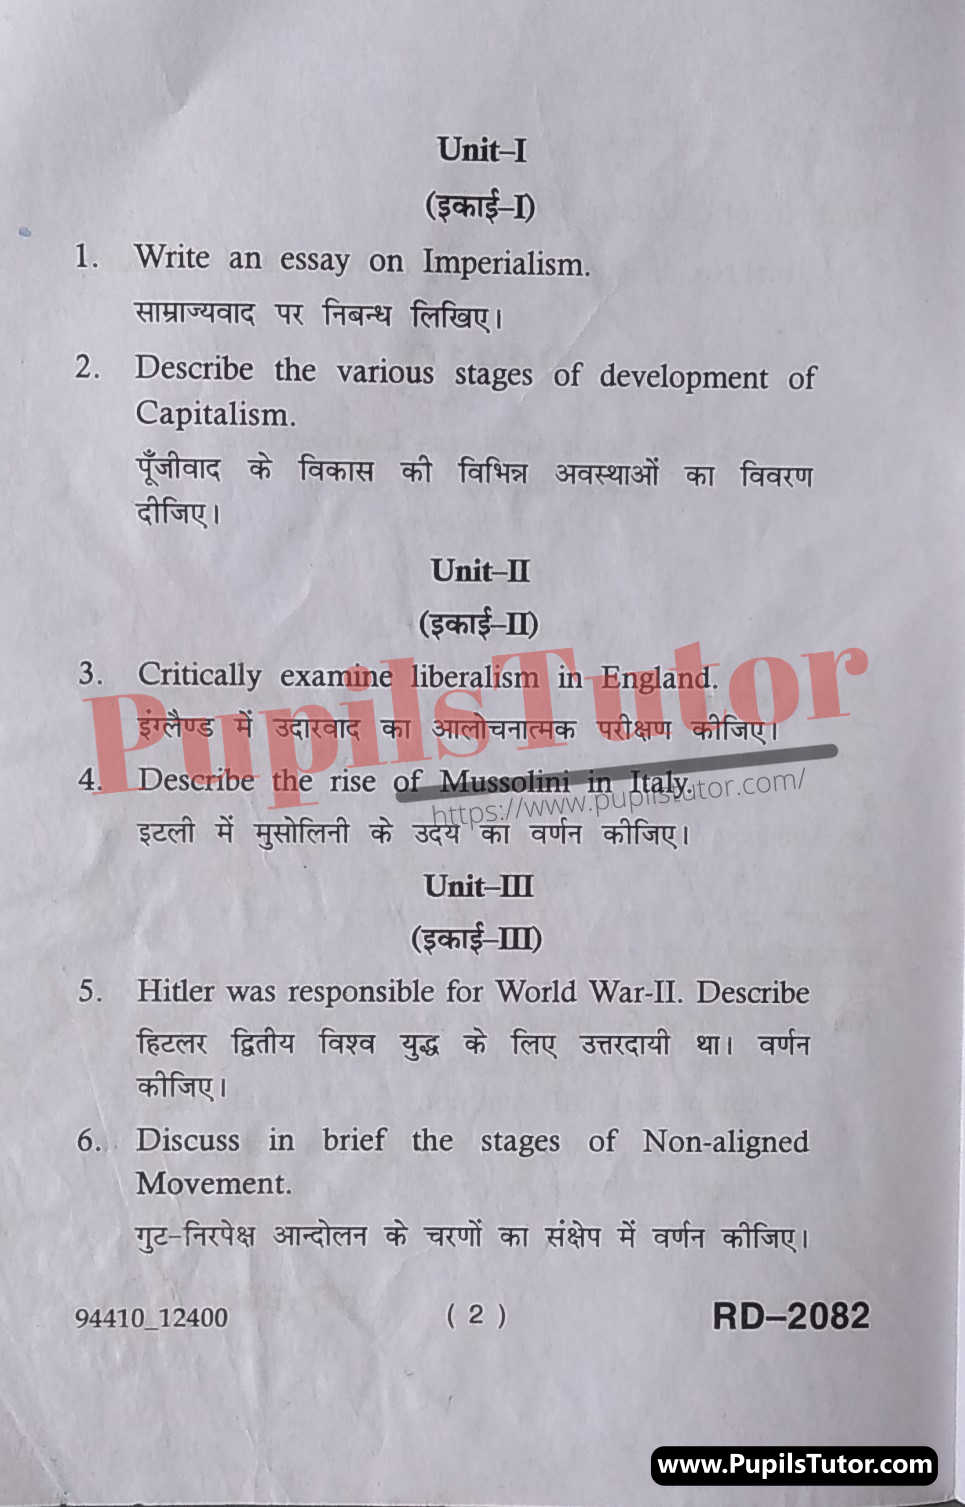 M.D. University B.A. History (Modern World) Sixth Semester Important Question Answer And Solution - www.pupilstutor.com (Paper Page Number 2)